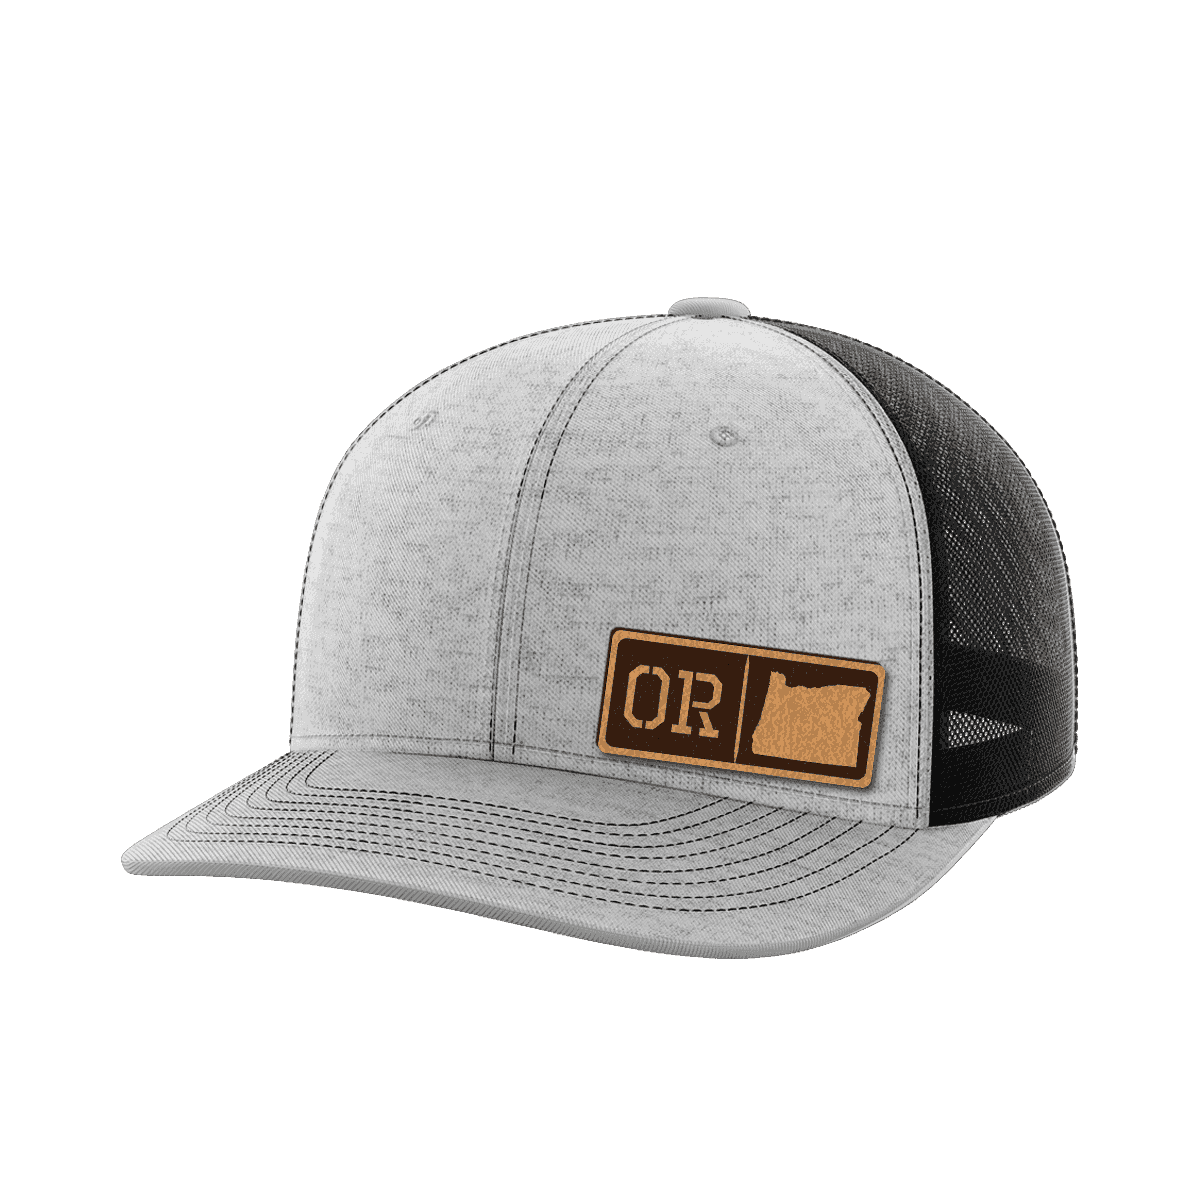 Thumbnail for Oregon Homegrown Hats - Greater Half